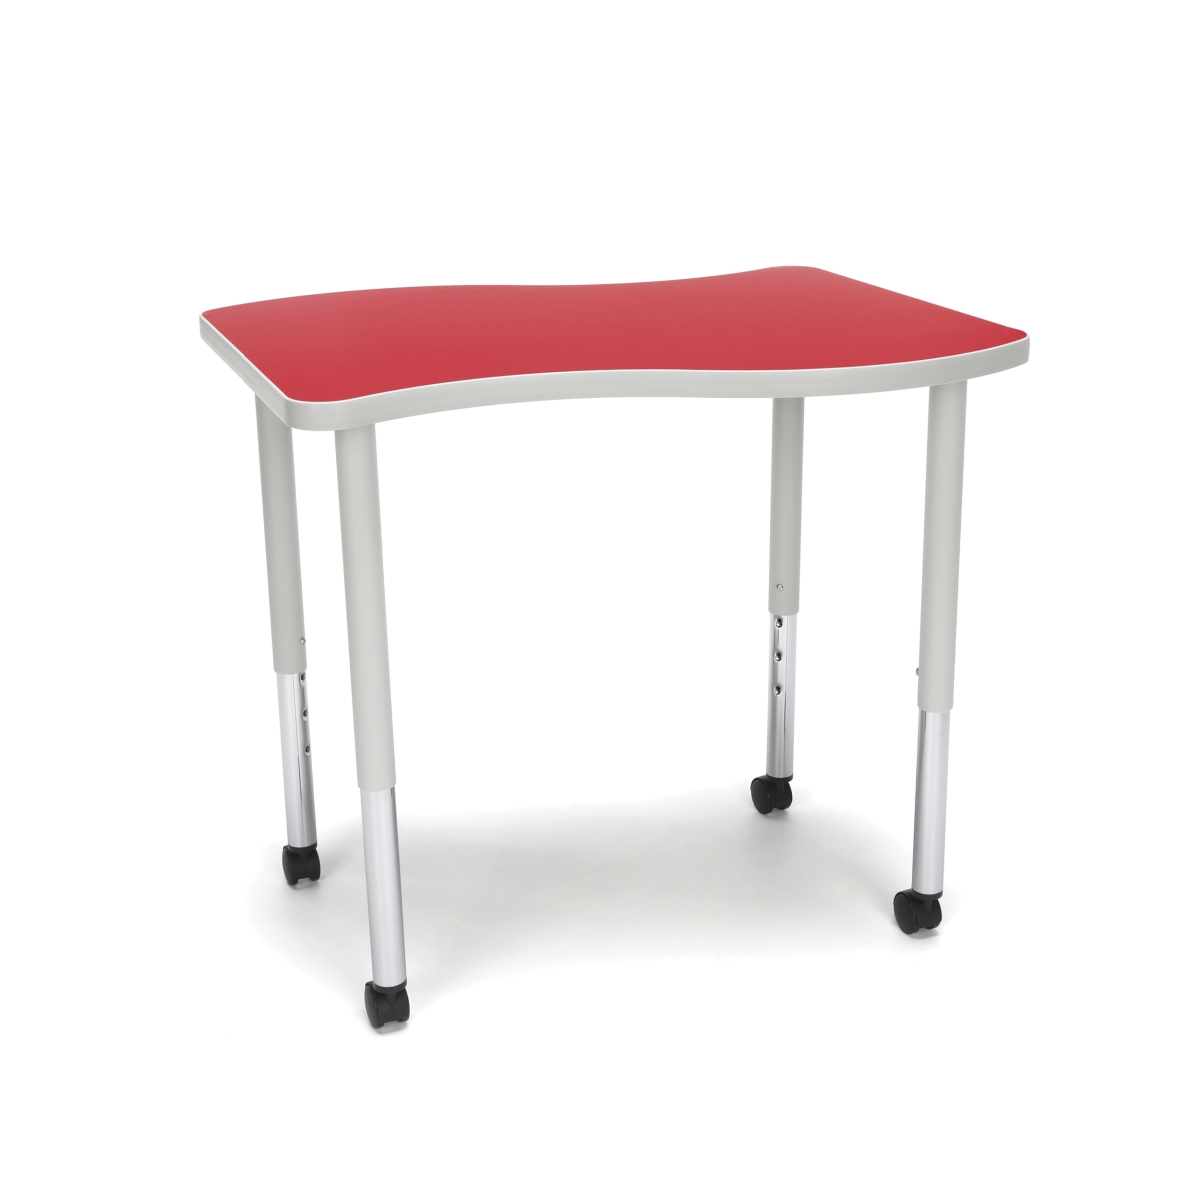 Wave-s-llc-red Adapt Series Small Wave Standard Table - 25-33 In. Height Adjustable Desk With Casters, Red